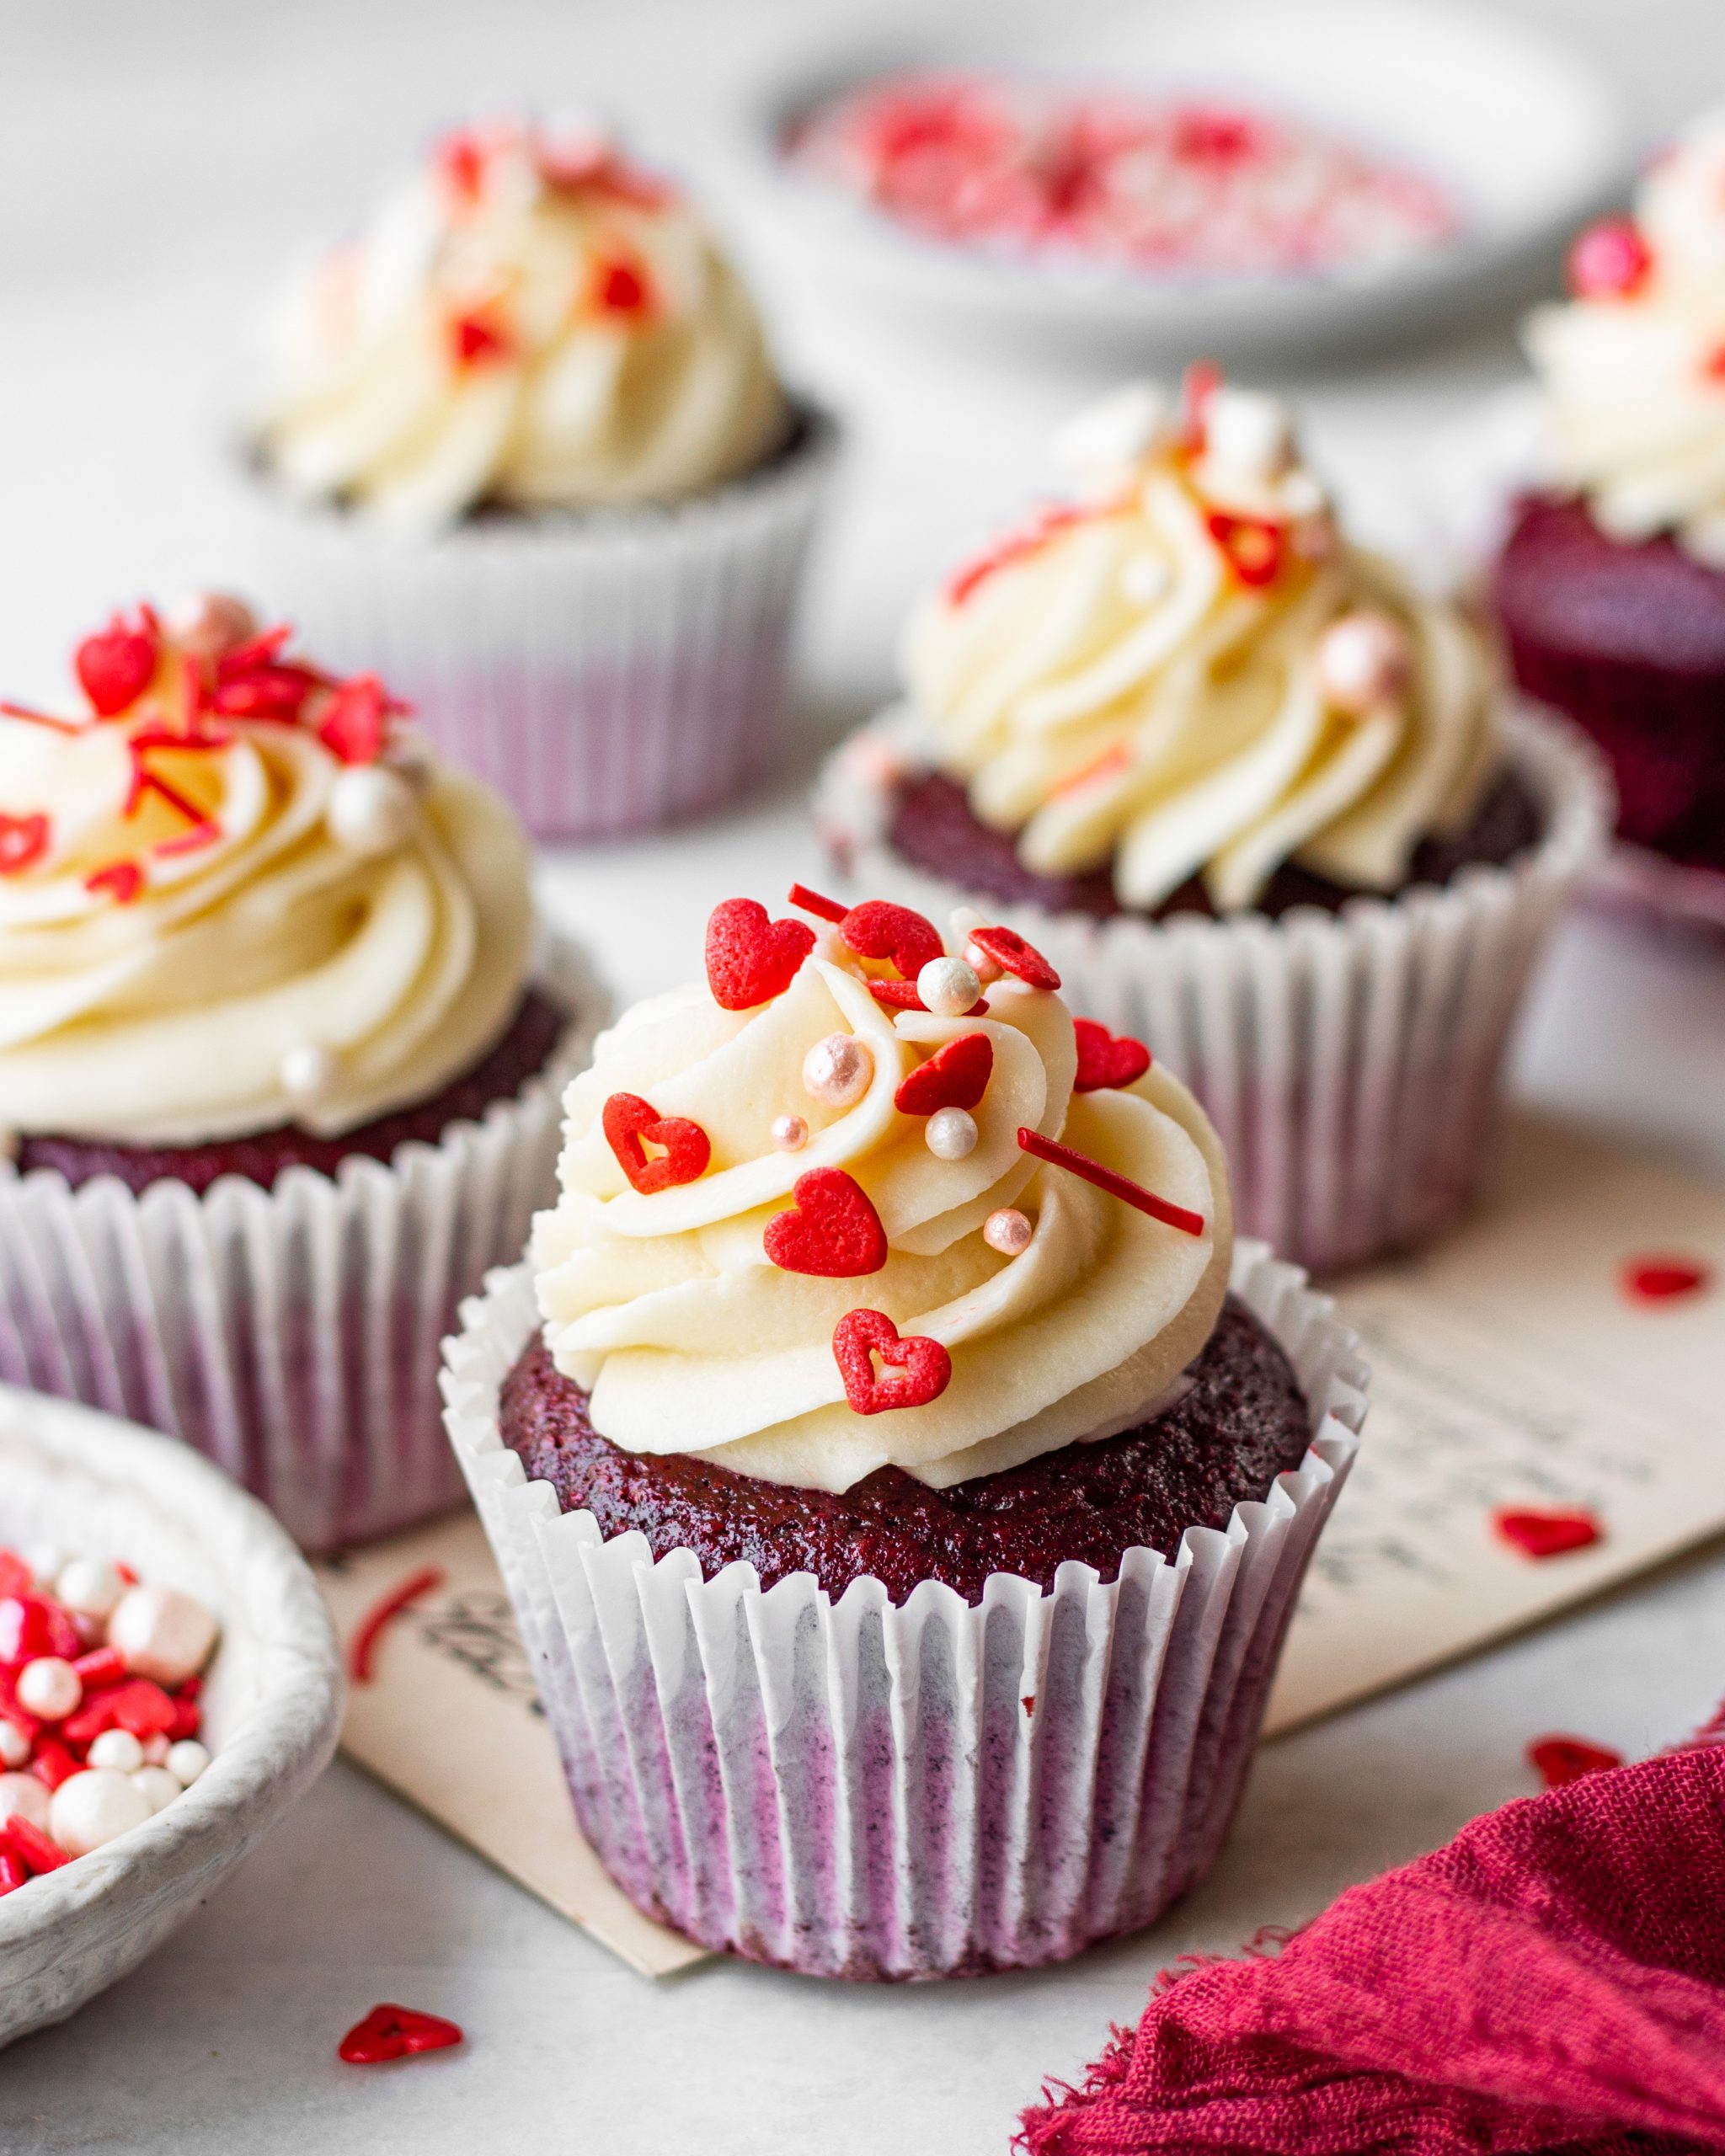 Share more than 67 red velvet cake cup - in.daotaonec